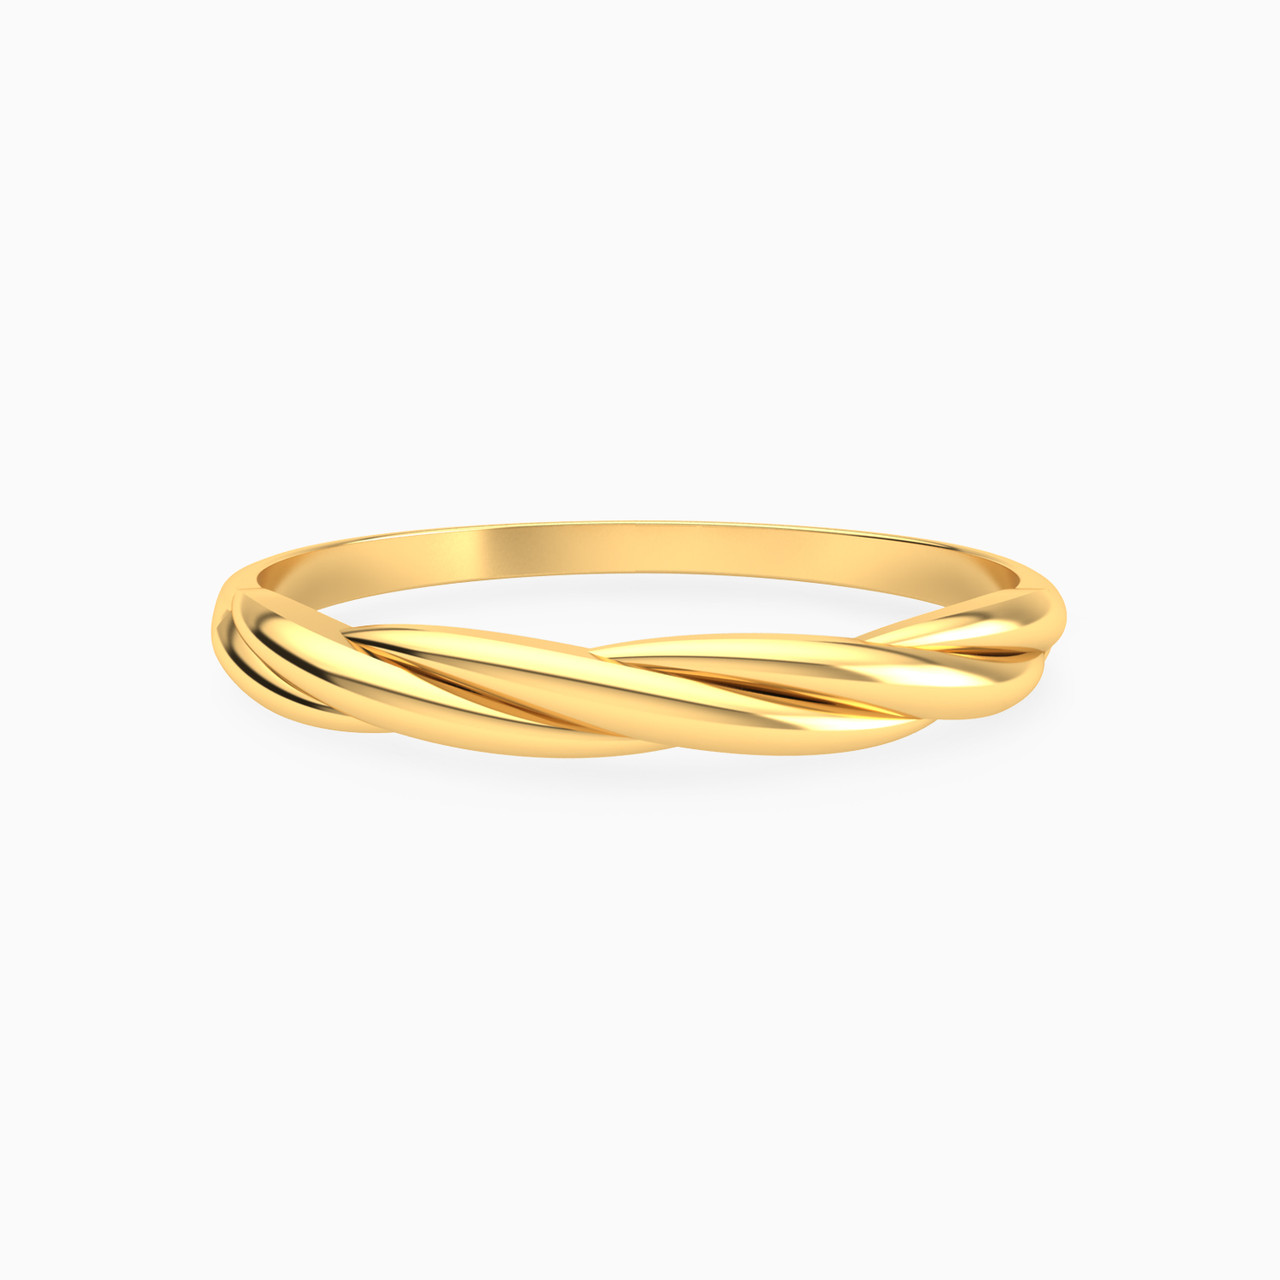 Braided Statement Ring in 14K Gold